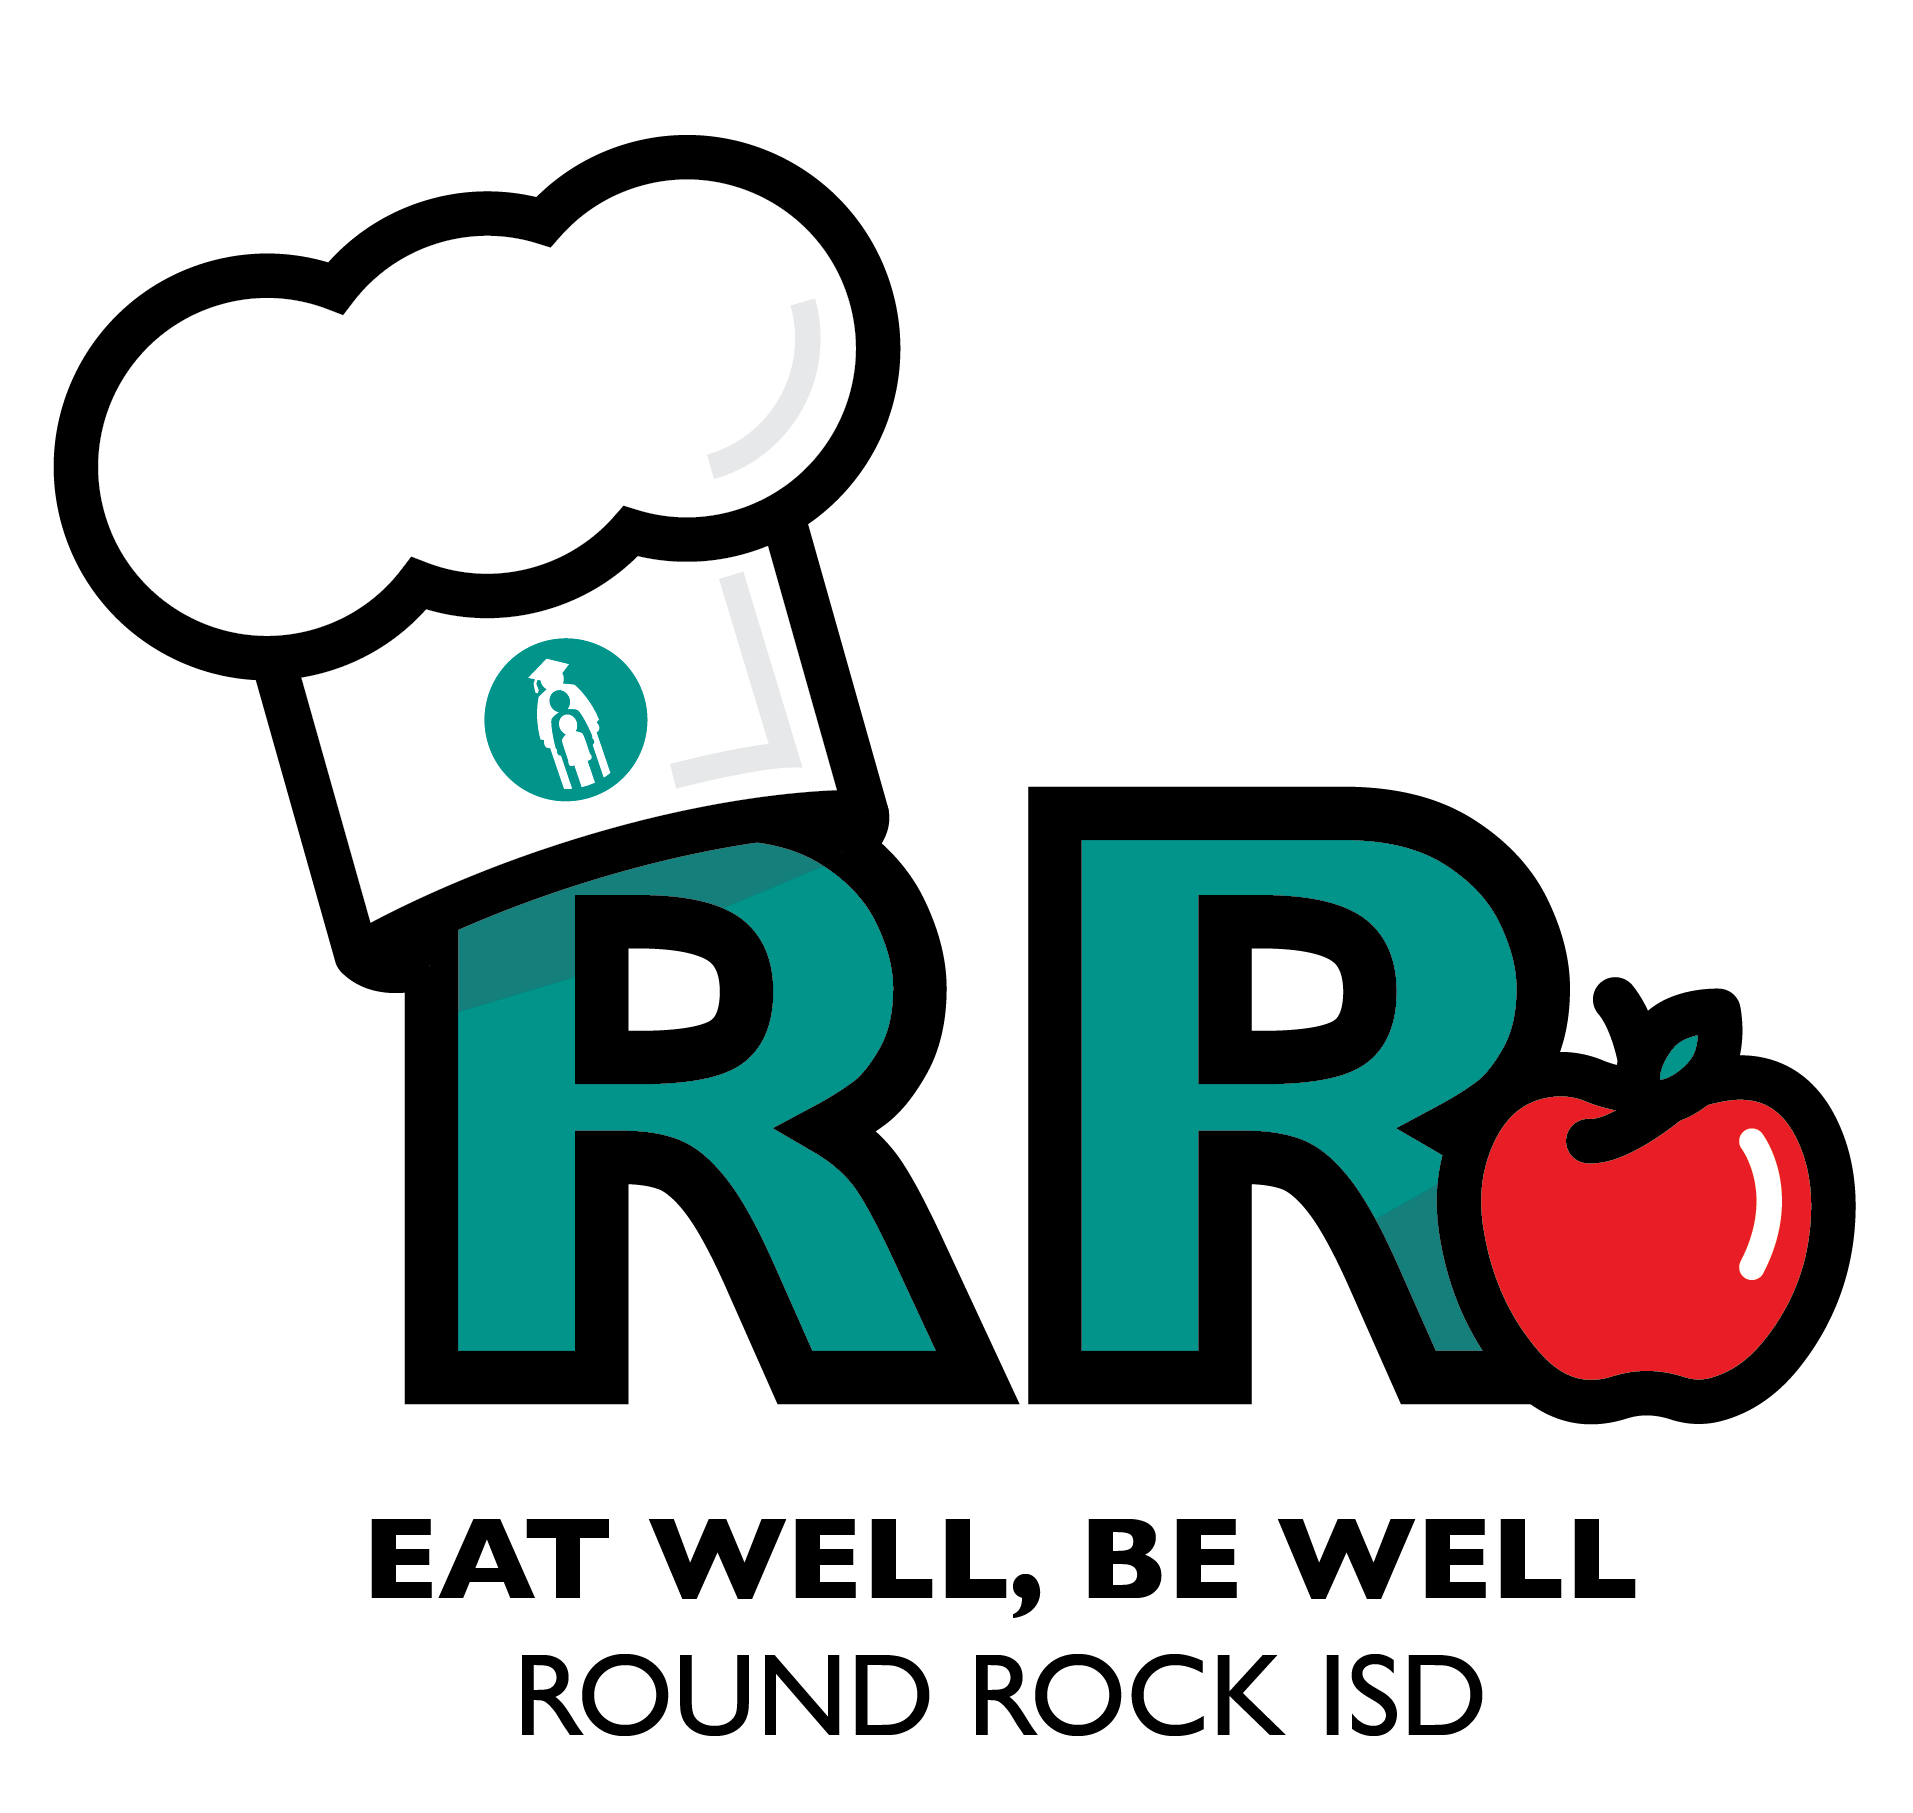 Services round rock isd. Cafeteria clipart food server